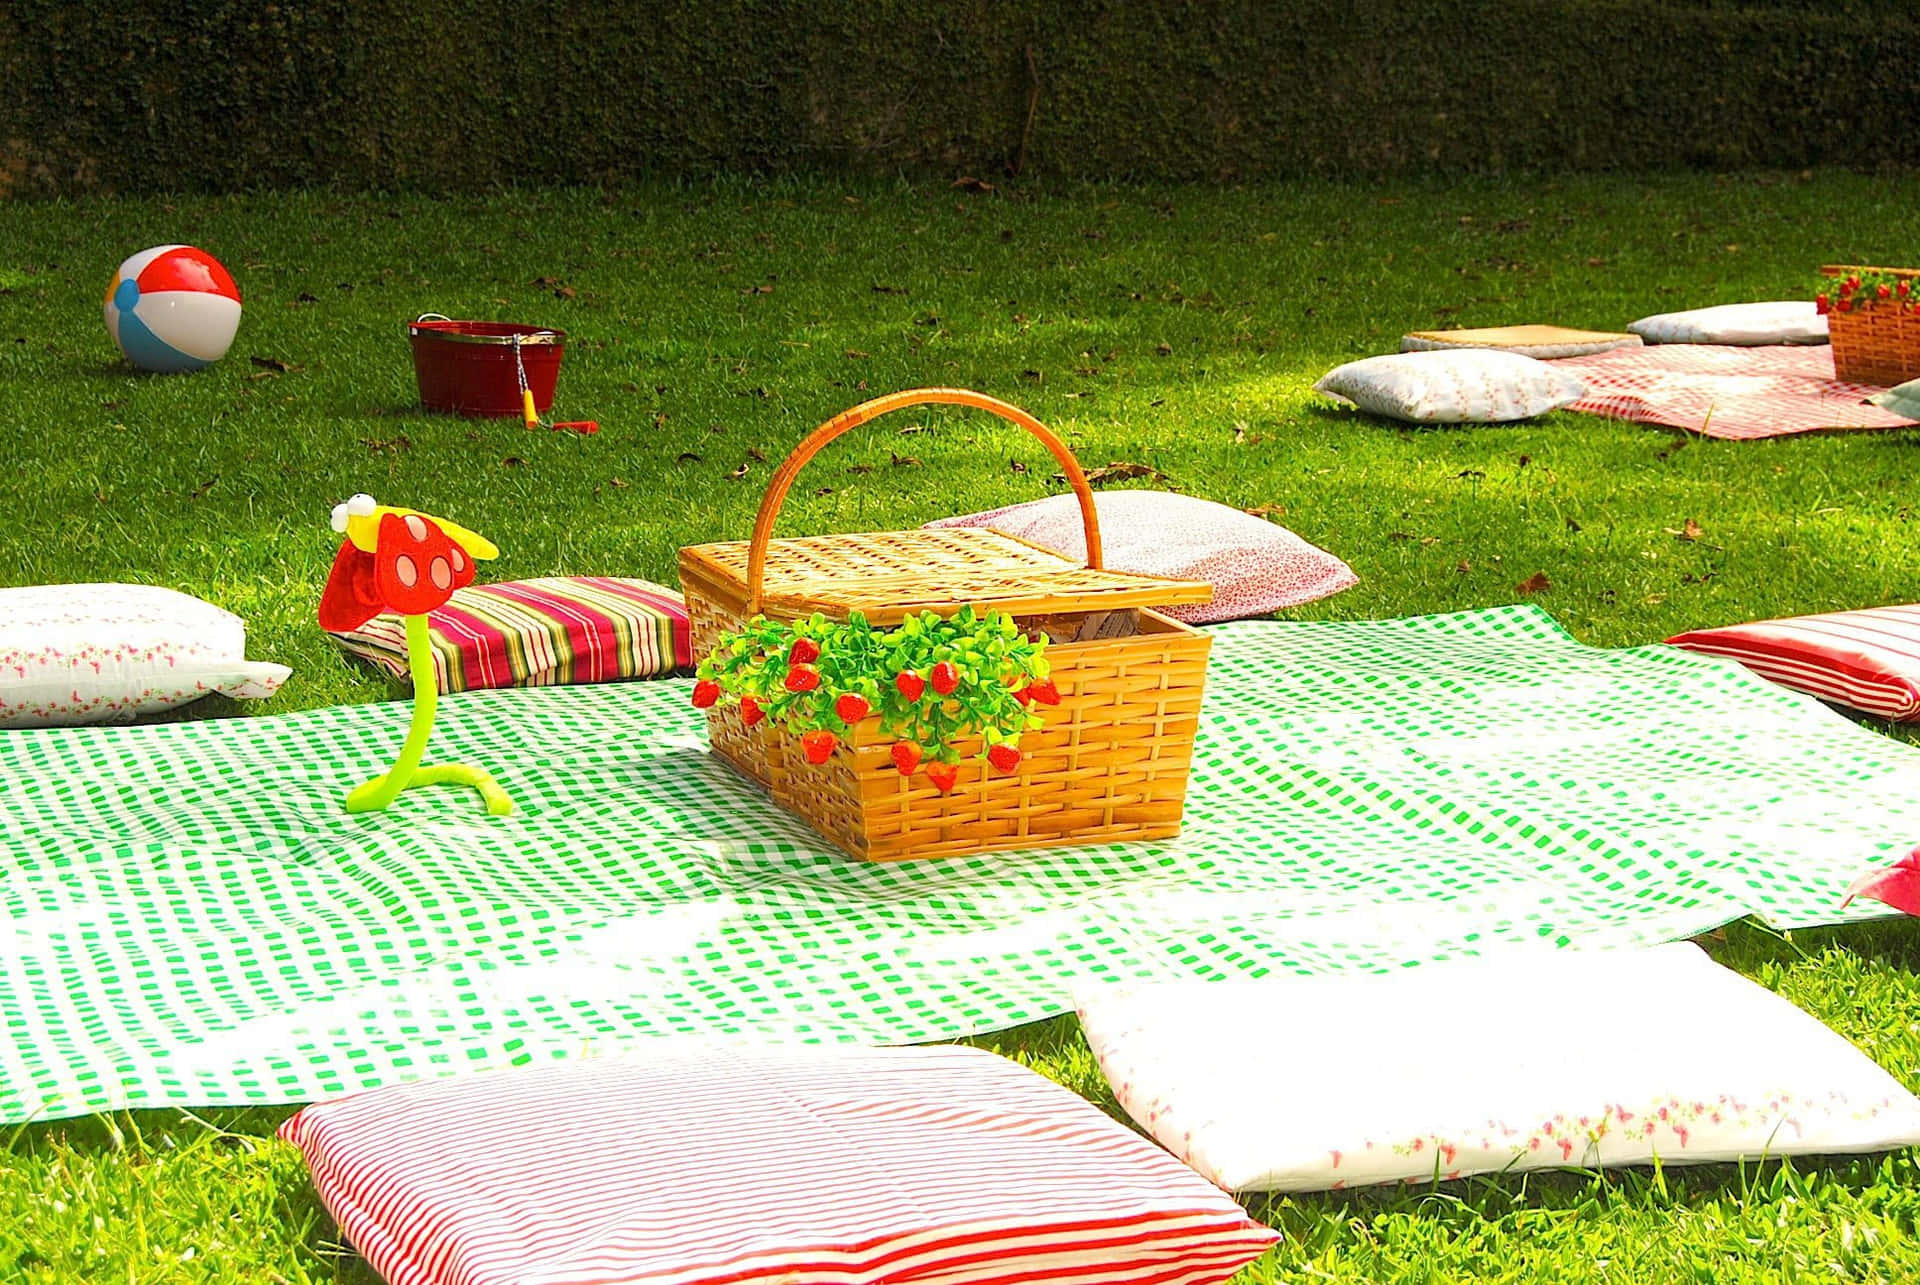 Picnic Set Up With Pillows Around Picture